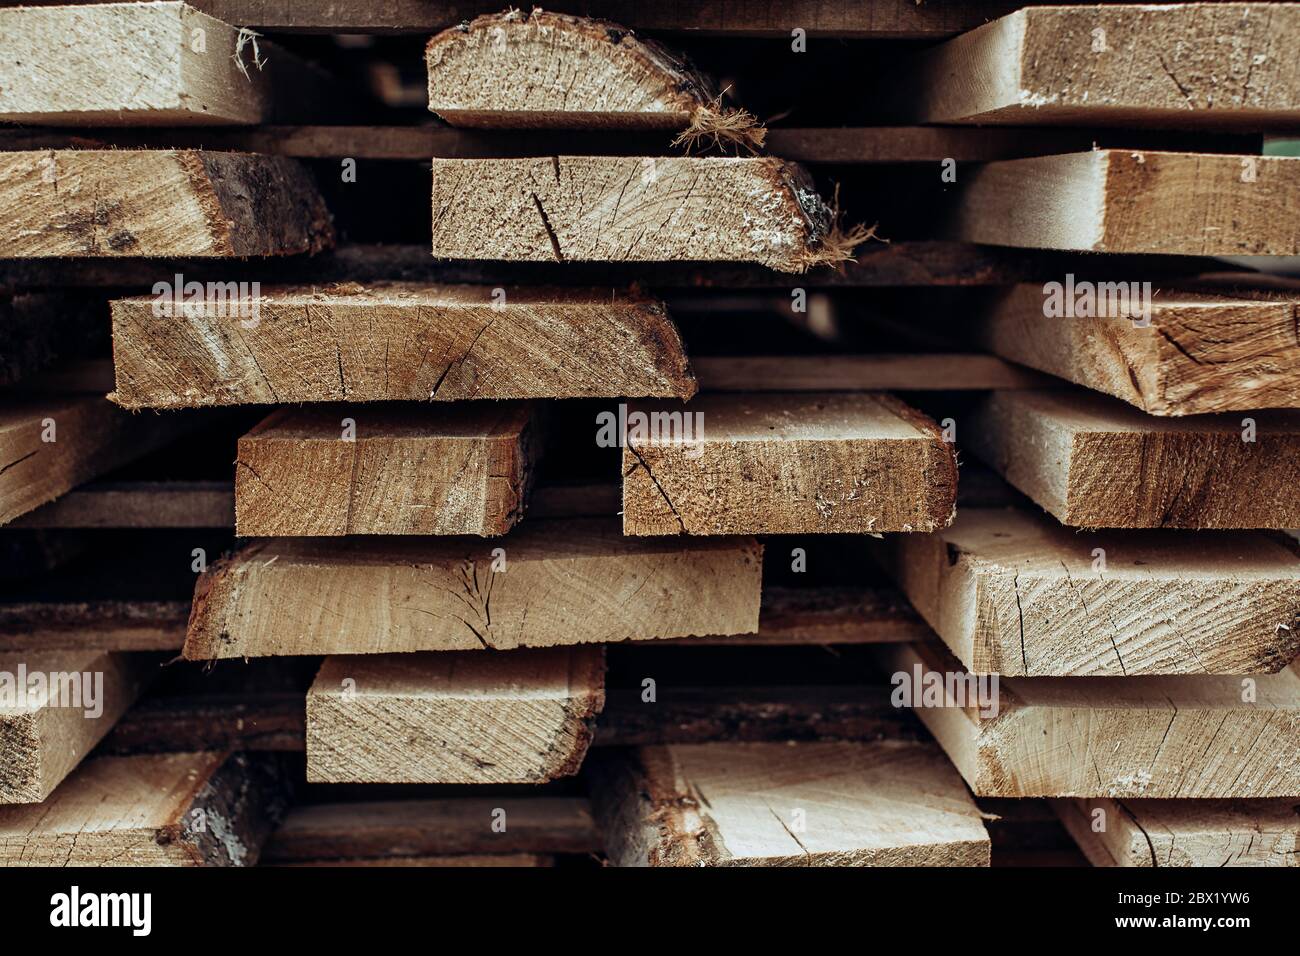 Piles of wooden boards in the sawmill, planking.  Stock Photo